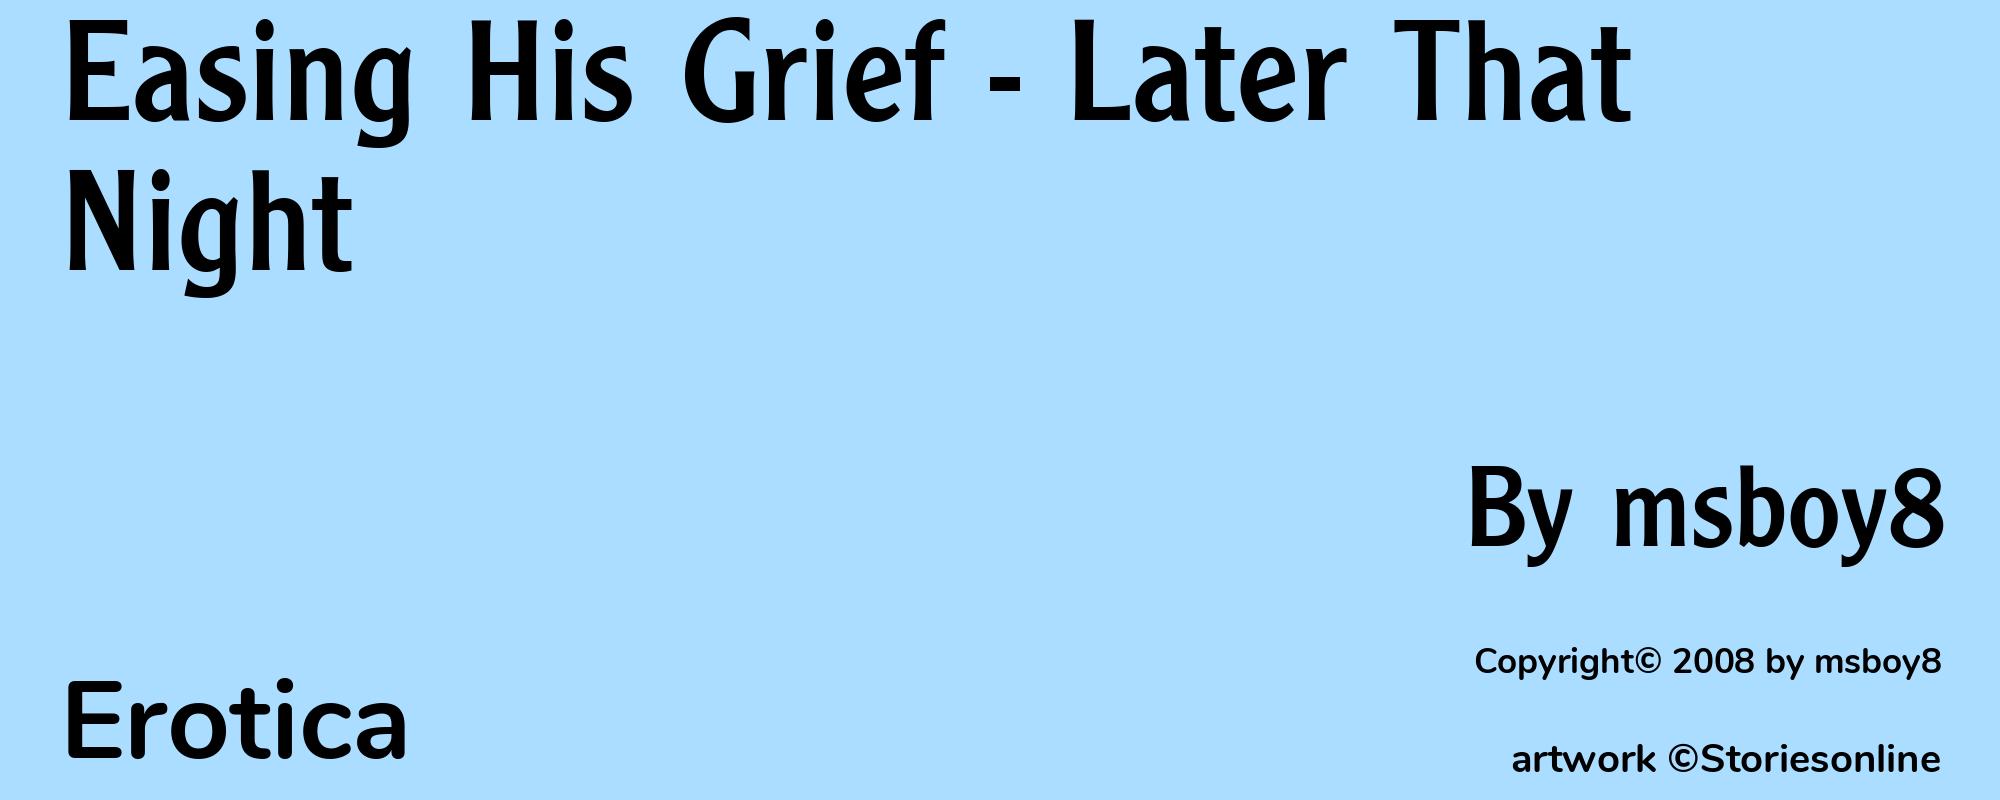 Easing His Grief - Later That Night - Cover